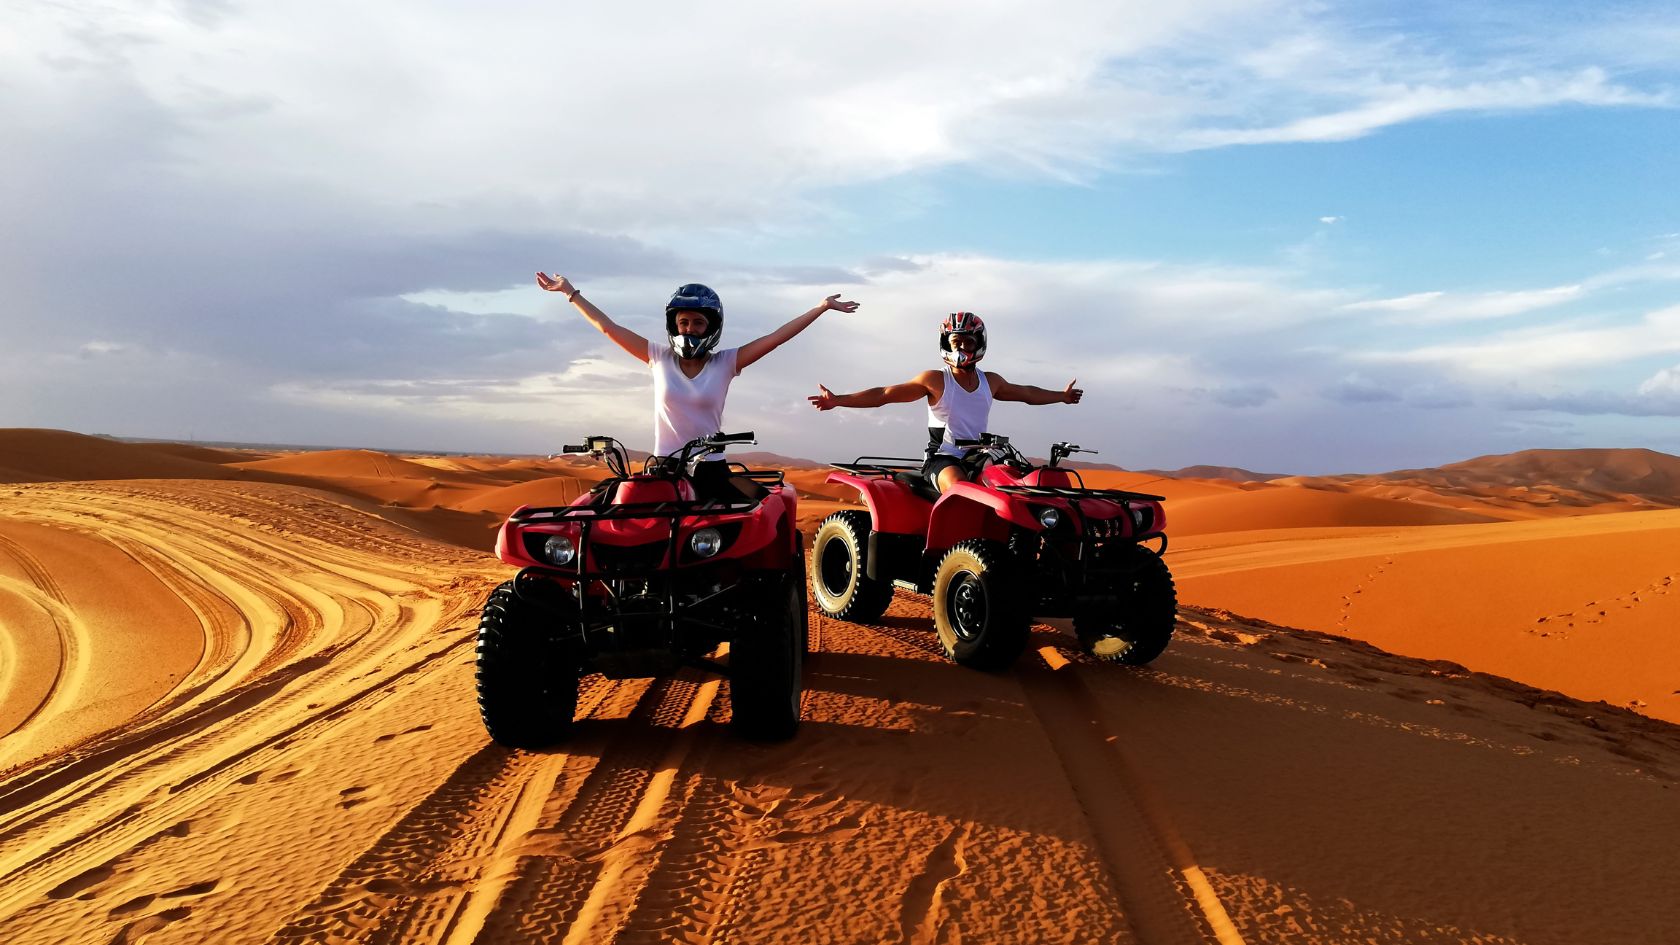 Two people on quadbikes in a desert waving their hands in the air.